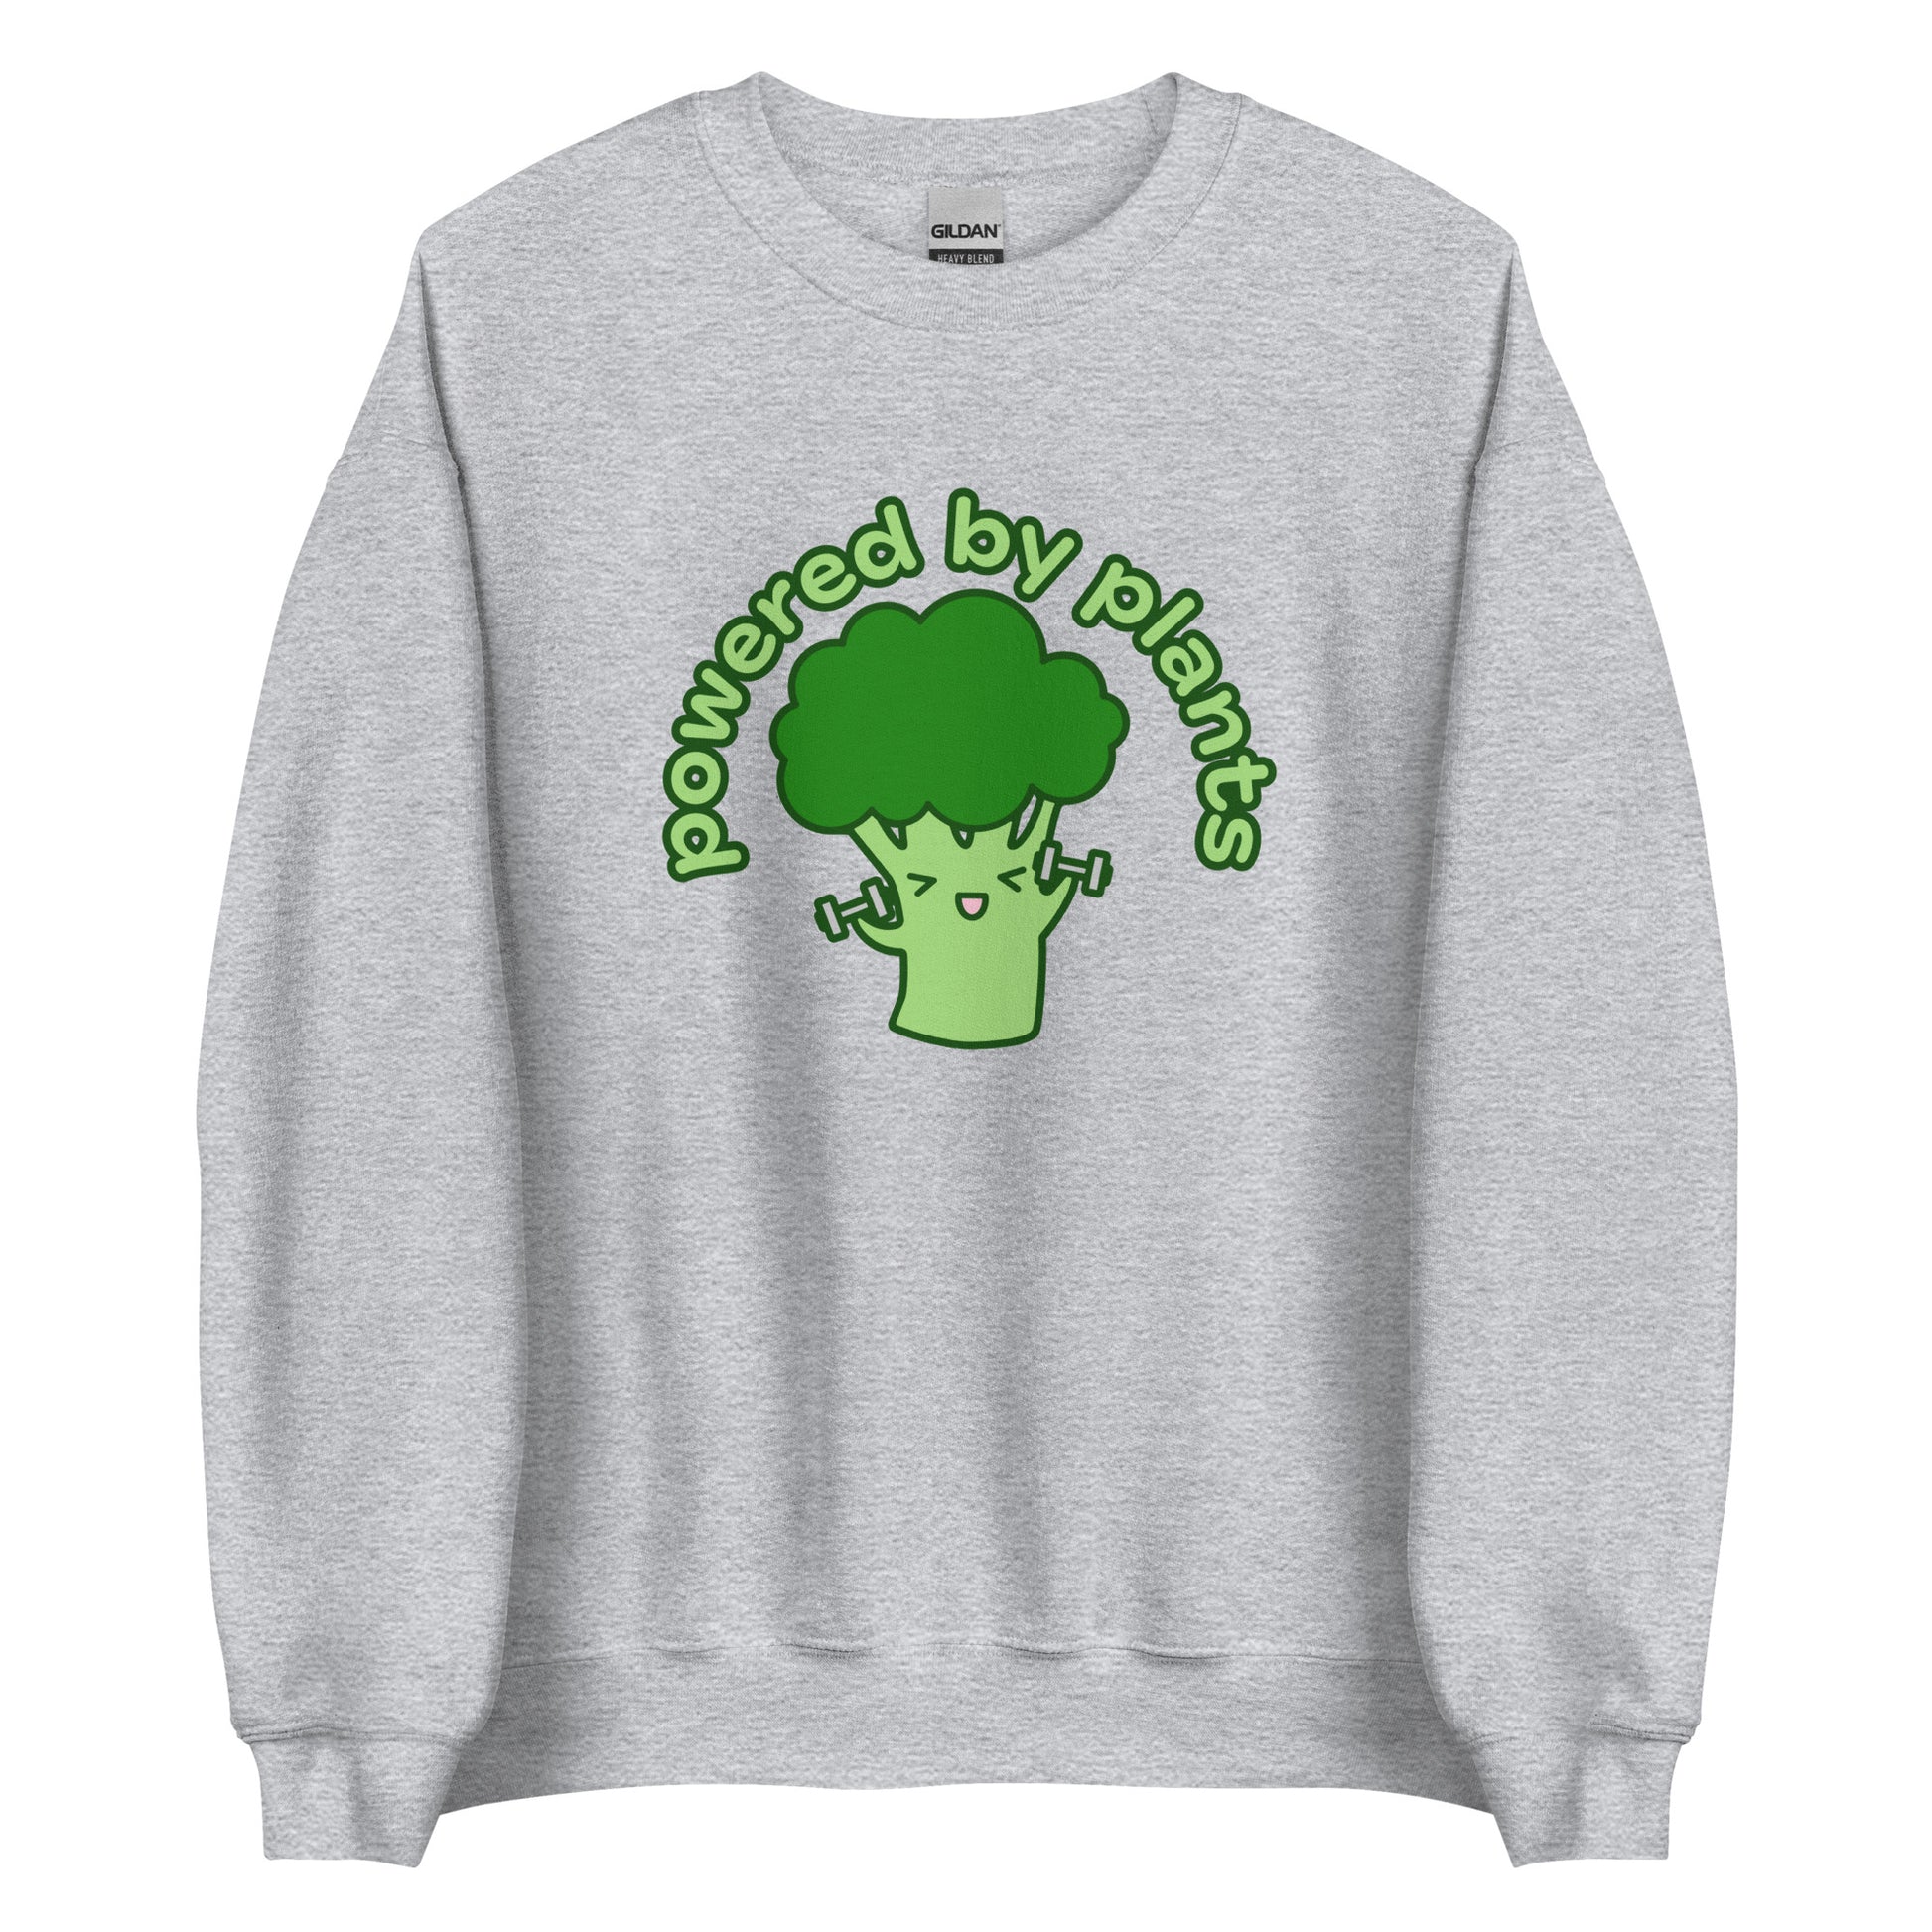 A grey crewneck sweatshirt featuring an illustration of a cartoon broccoli character. The broccoli is excitedly lifting weights, and text in an arc above the broccoli reads "powered by plants".